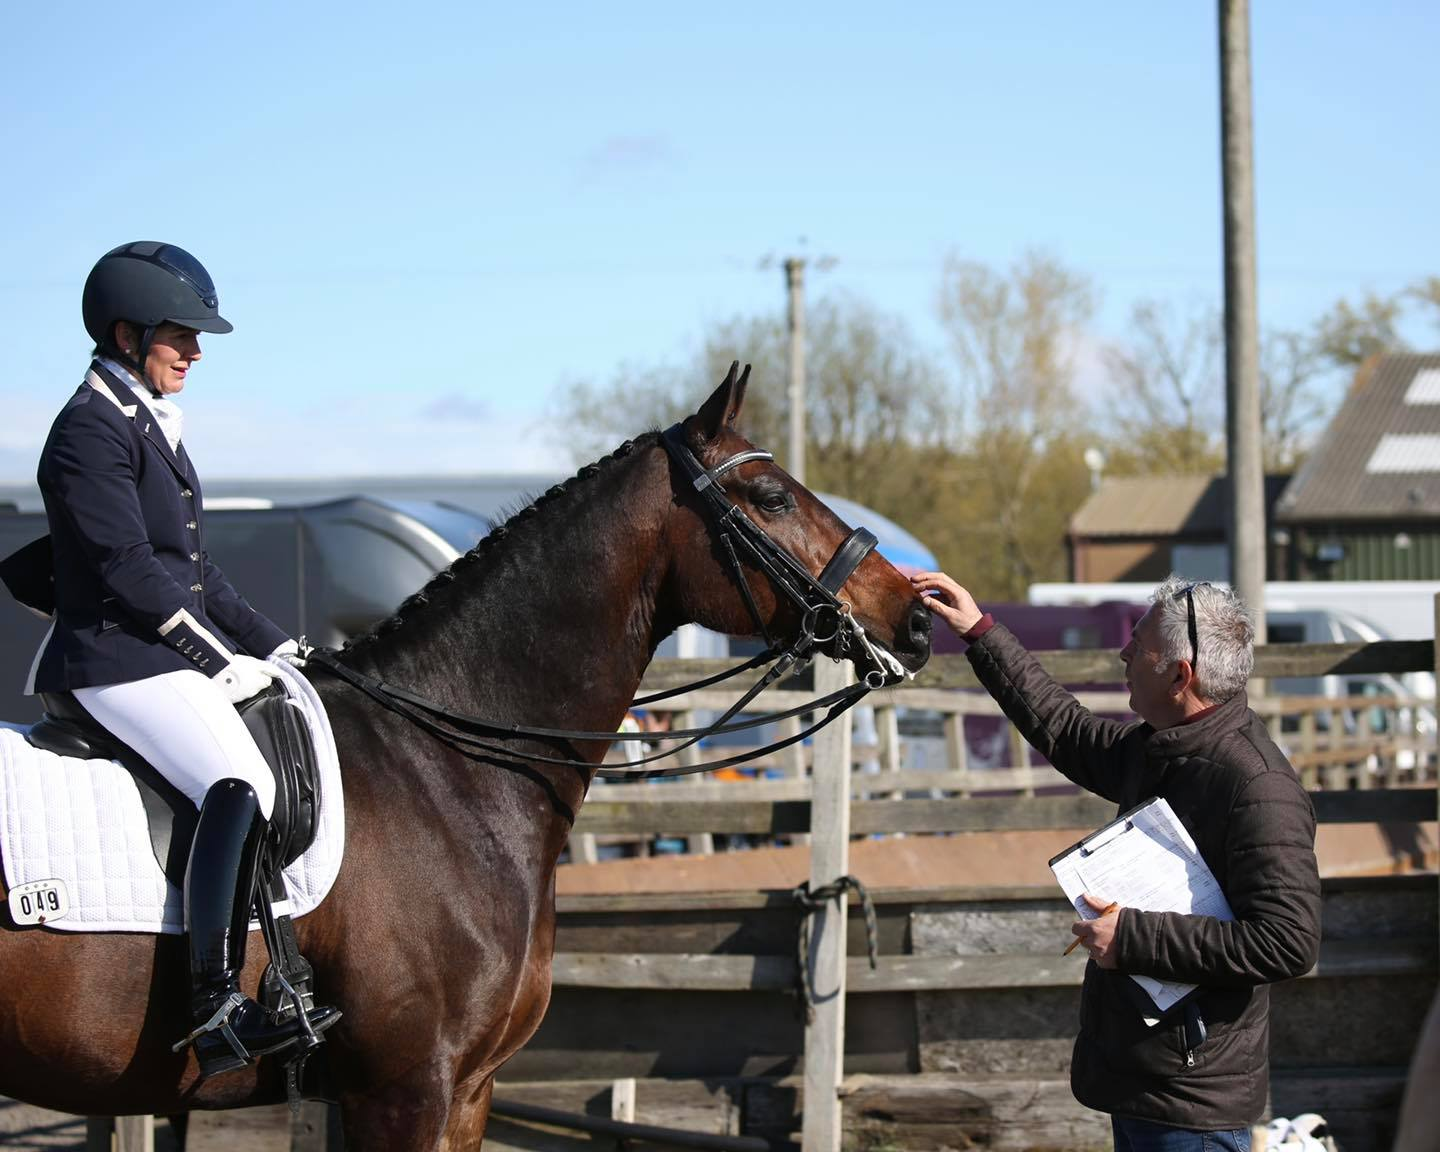 The Beginners Guide to Horse Diet - How Diet Affects your Horse’s Behaviour and Performance